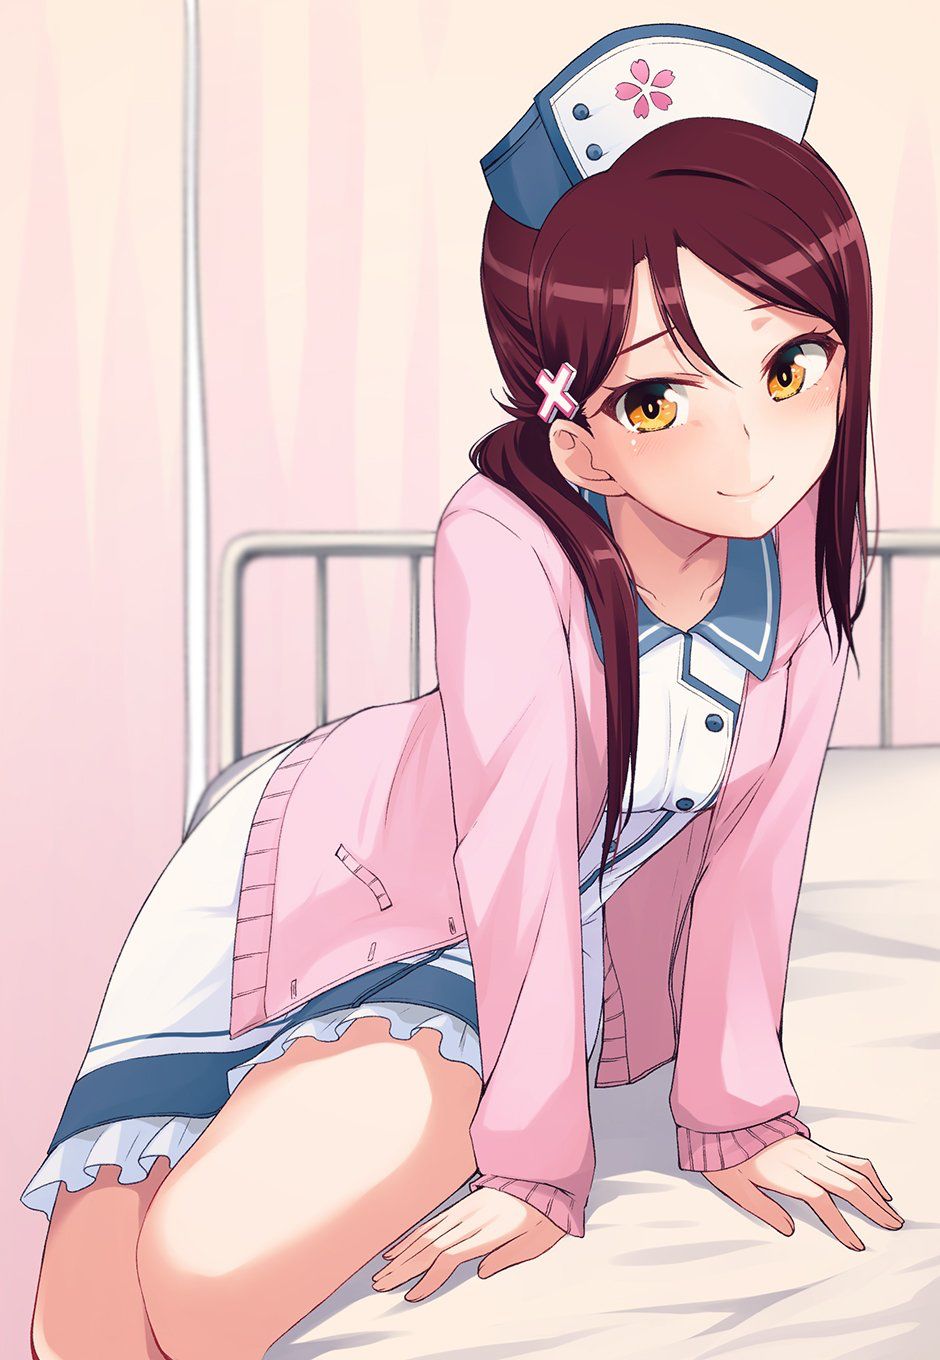 "A love live 曜 wwwwww (there is an image) of the patient sexually harassing sunshine" pretty over nurse Riko 10